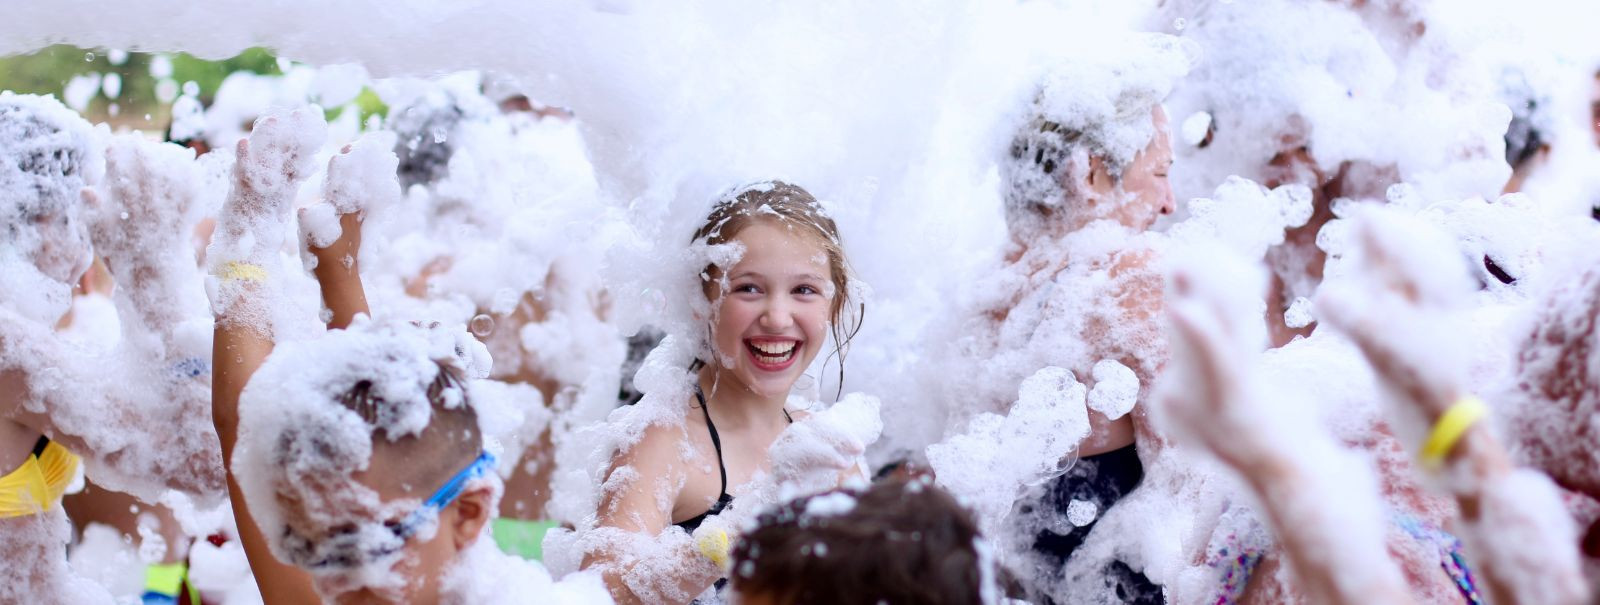 As the quest for unique and immersive experiences continues to shape the event industry, foam parties are emerging as the latest trend to captivate audiences of